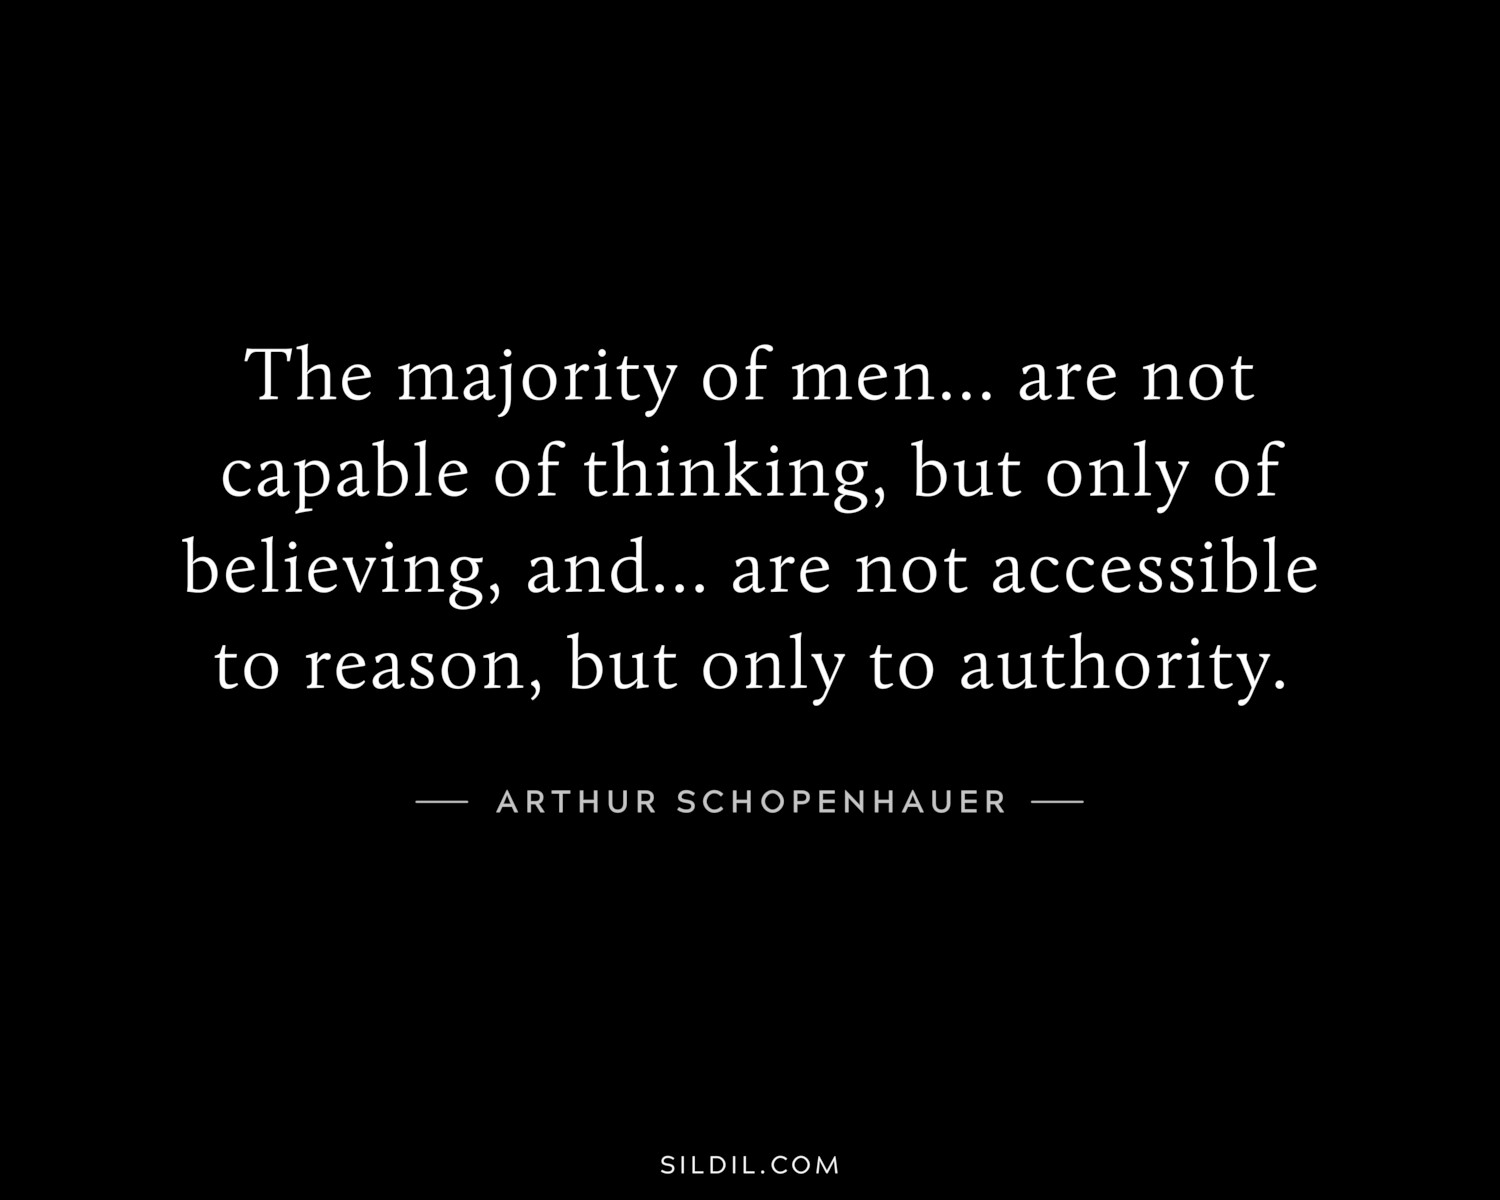 The majority of men... are not capable of thinking, but only of believing, and... are not accessible to reason, but only to authority.